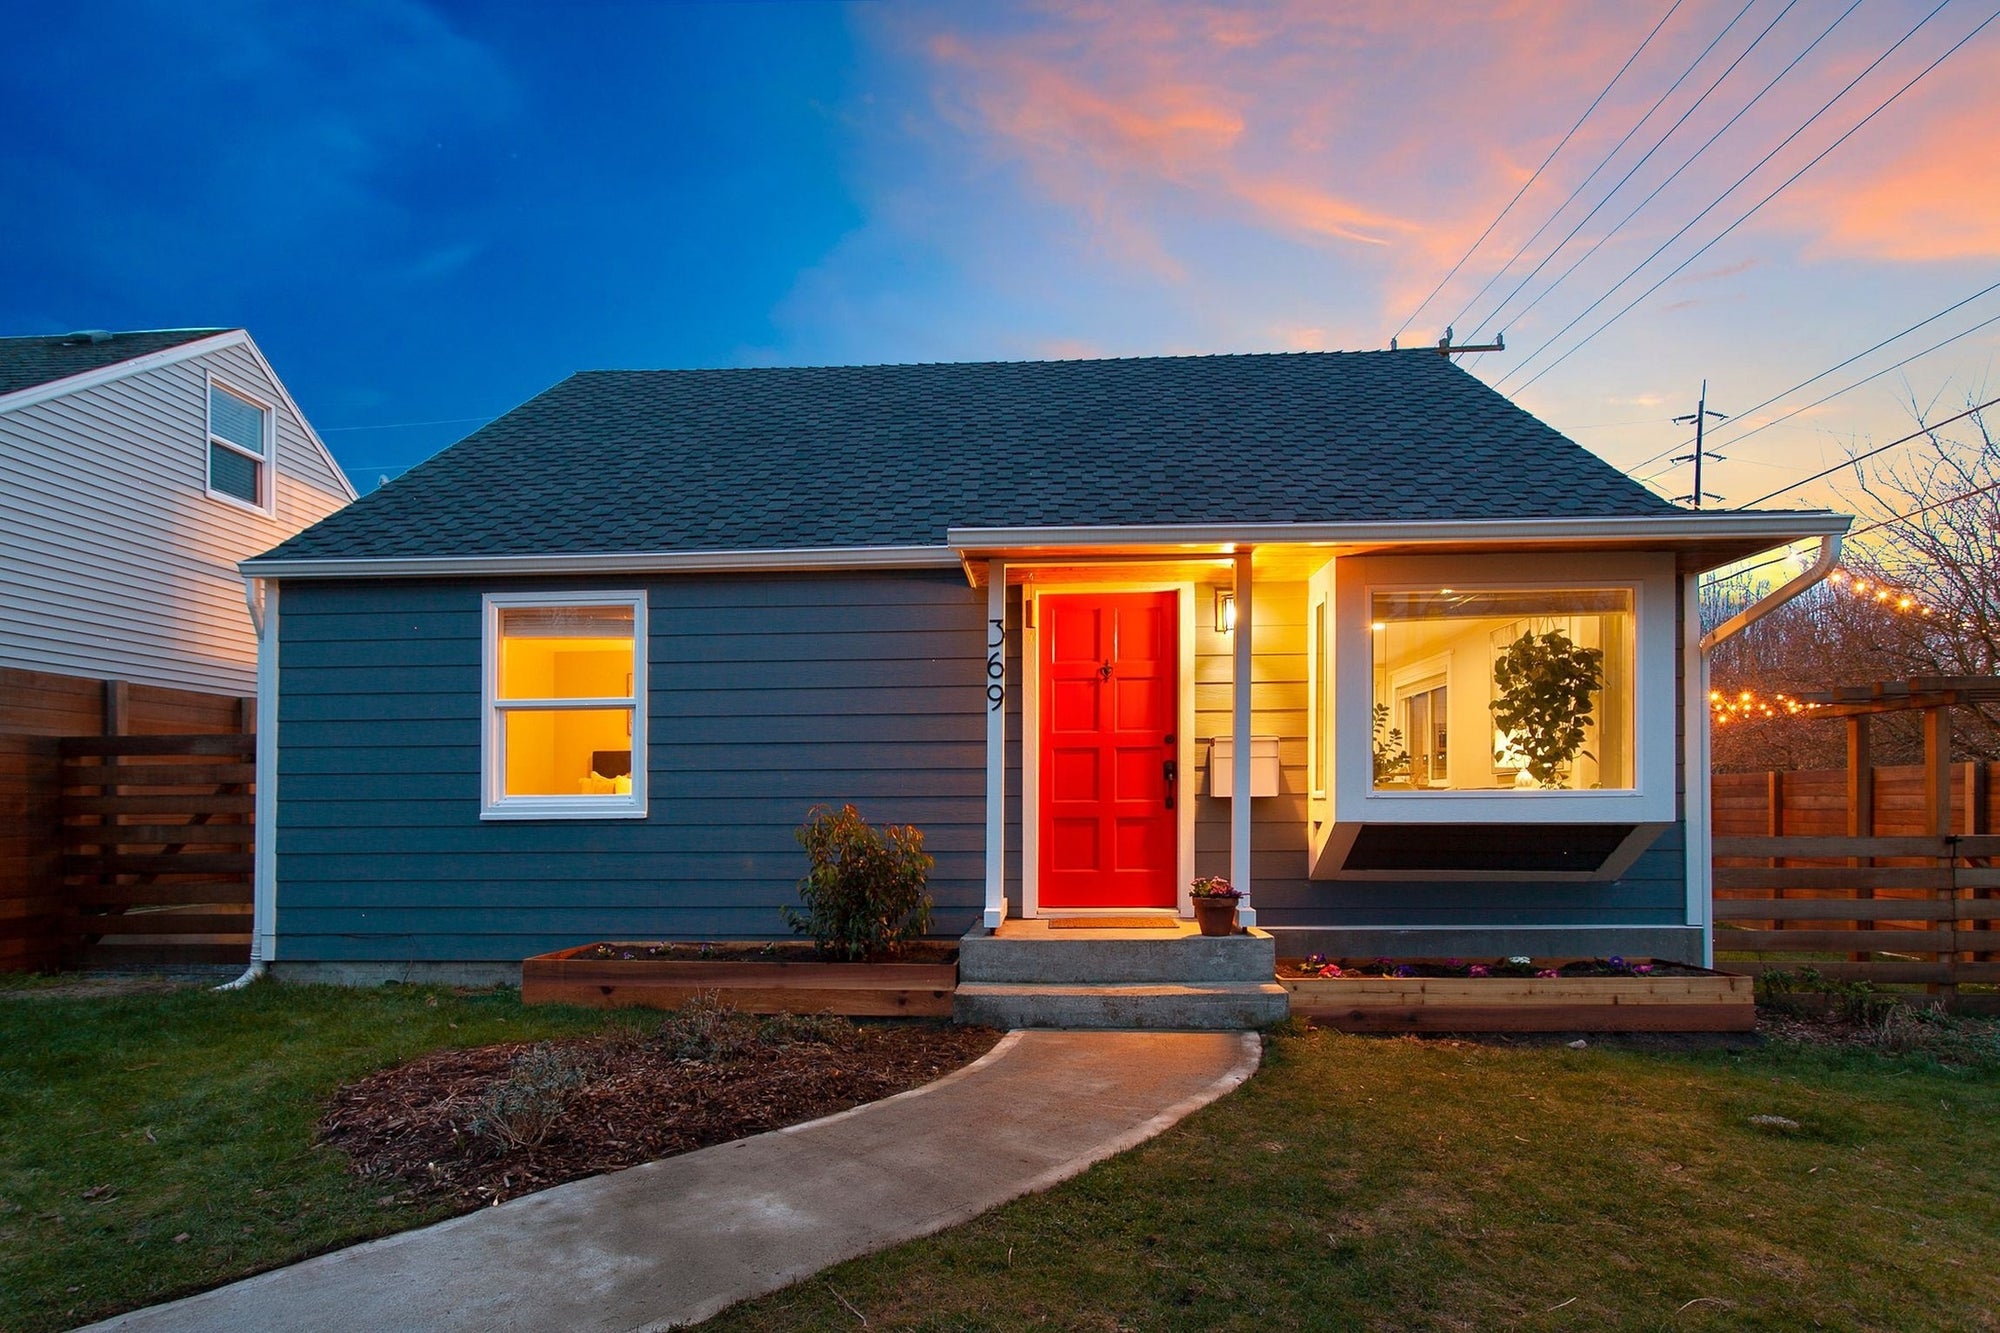 Check out the recent Redfin article we were featured in:  Expert Advice for Picking the Best Exterior Paint Colors for Your Home